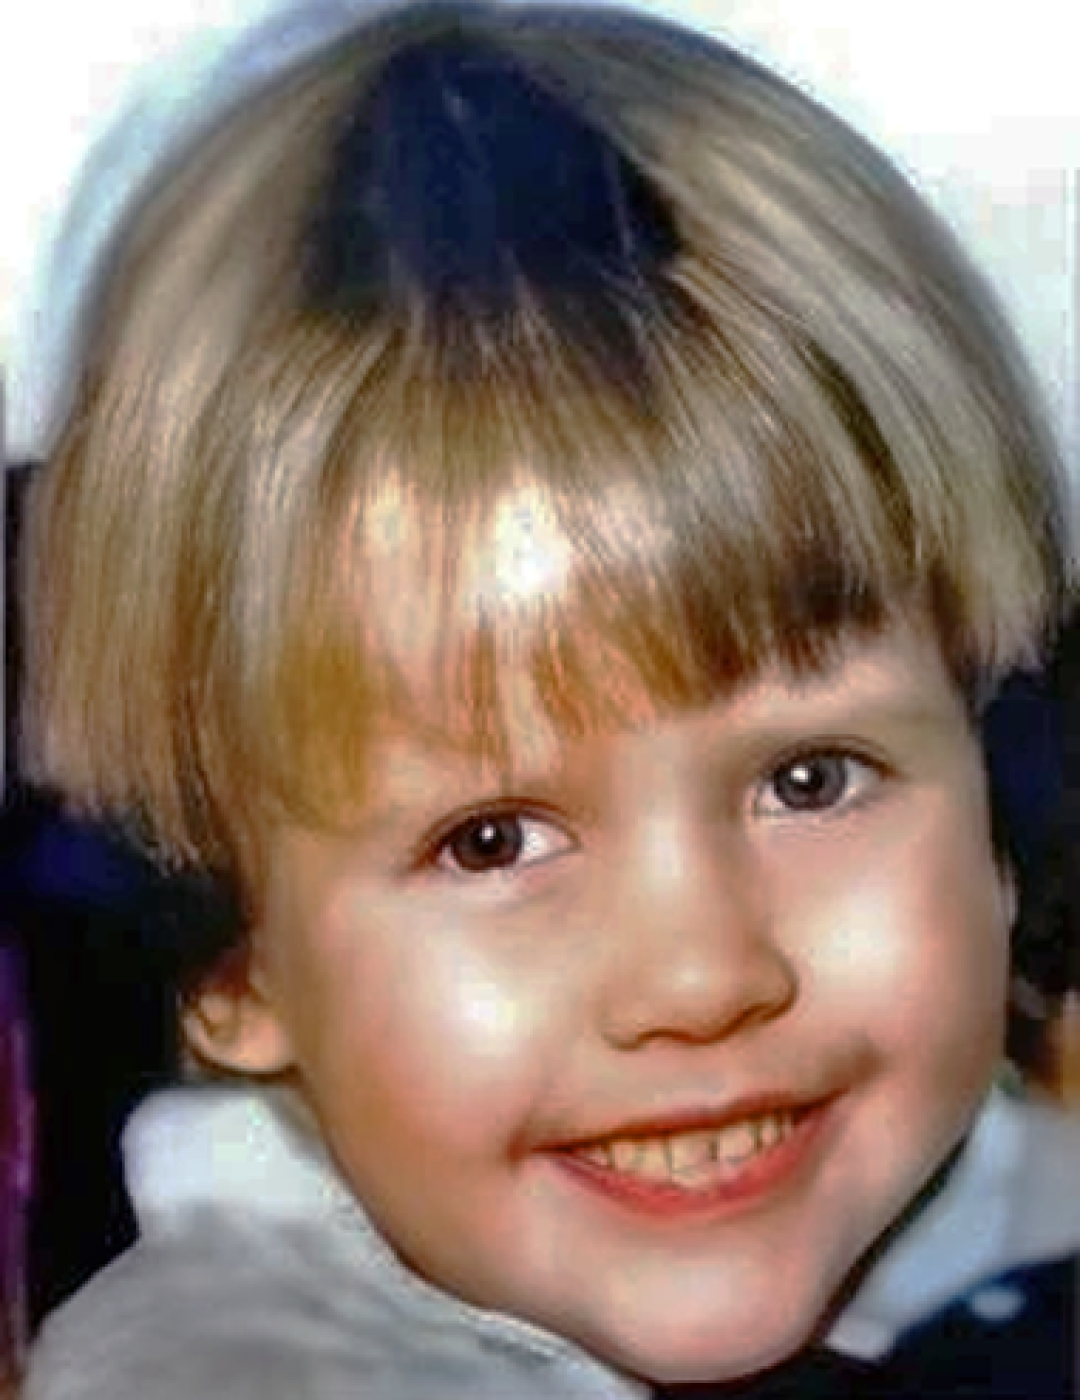 Jackie Hay. Missing child with blonde hair and blue eyes.